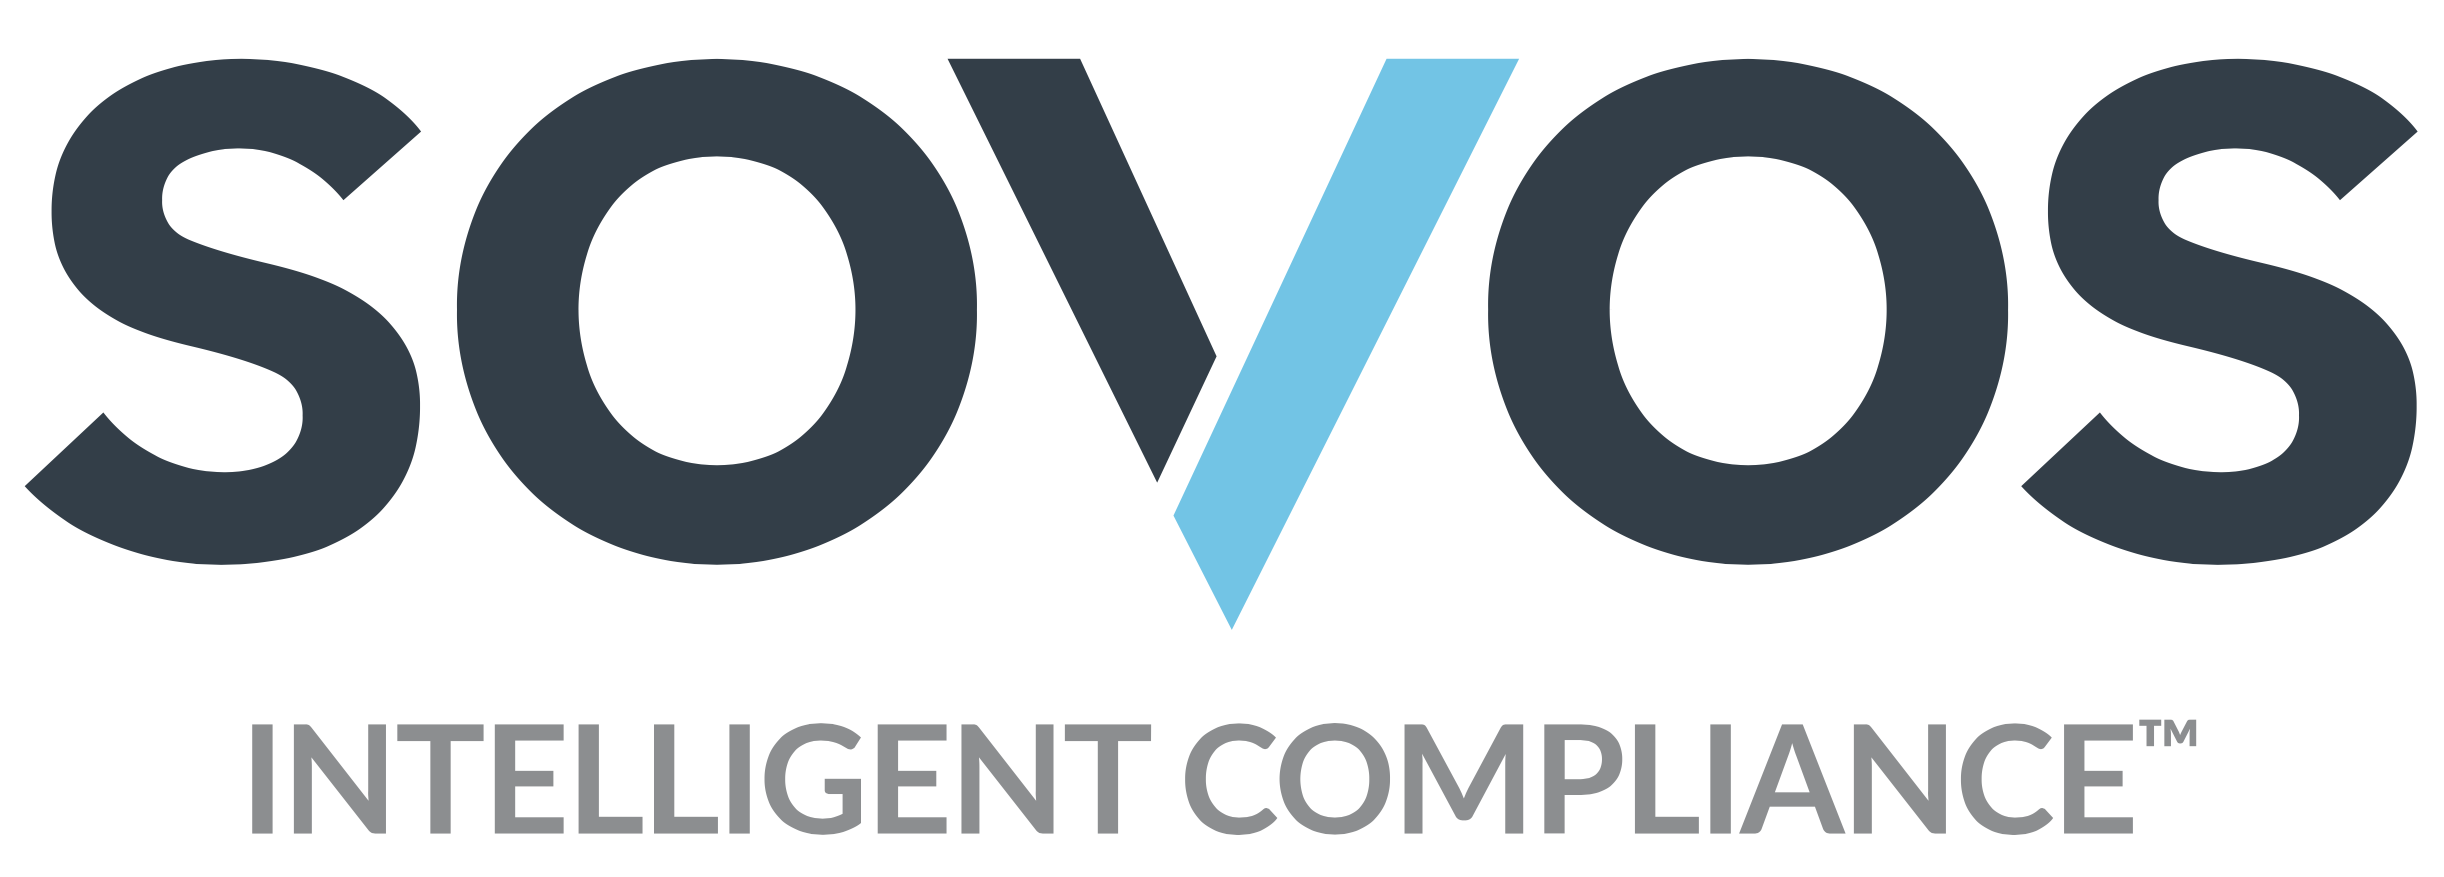 Sovos Introduces Intelligent Compliance Cloud To Safeguard Businesses From Increasingly Complex